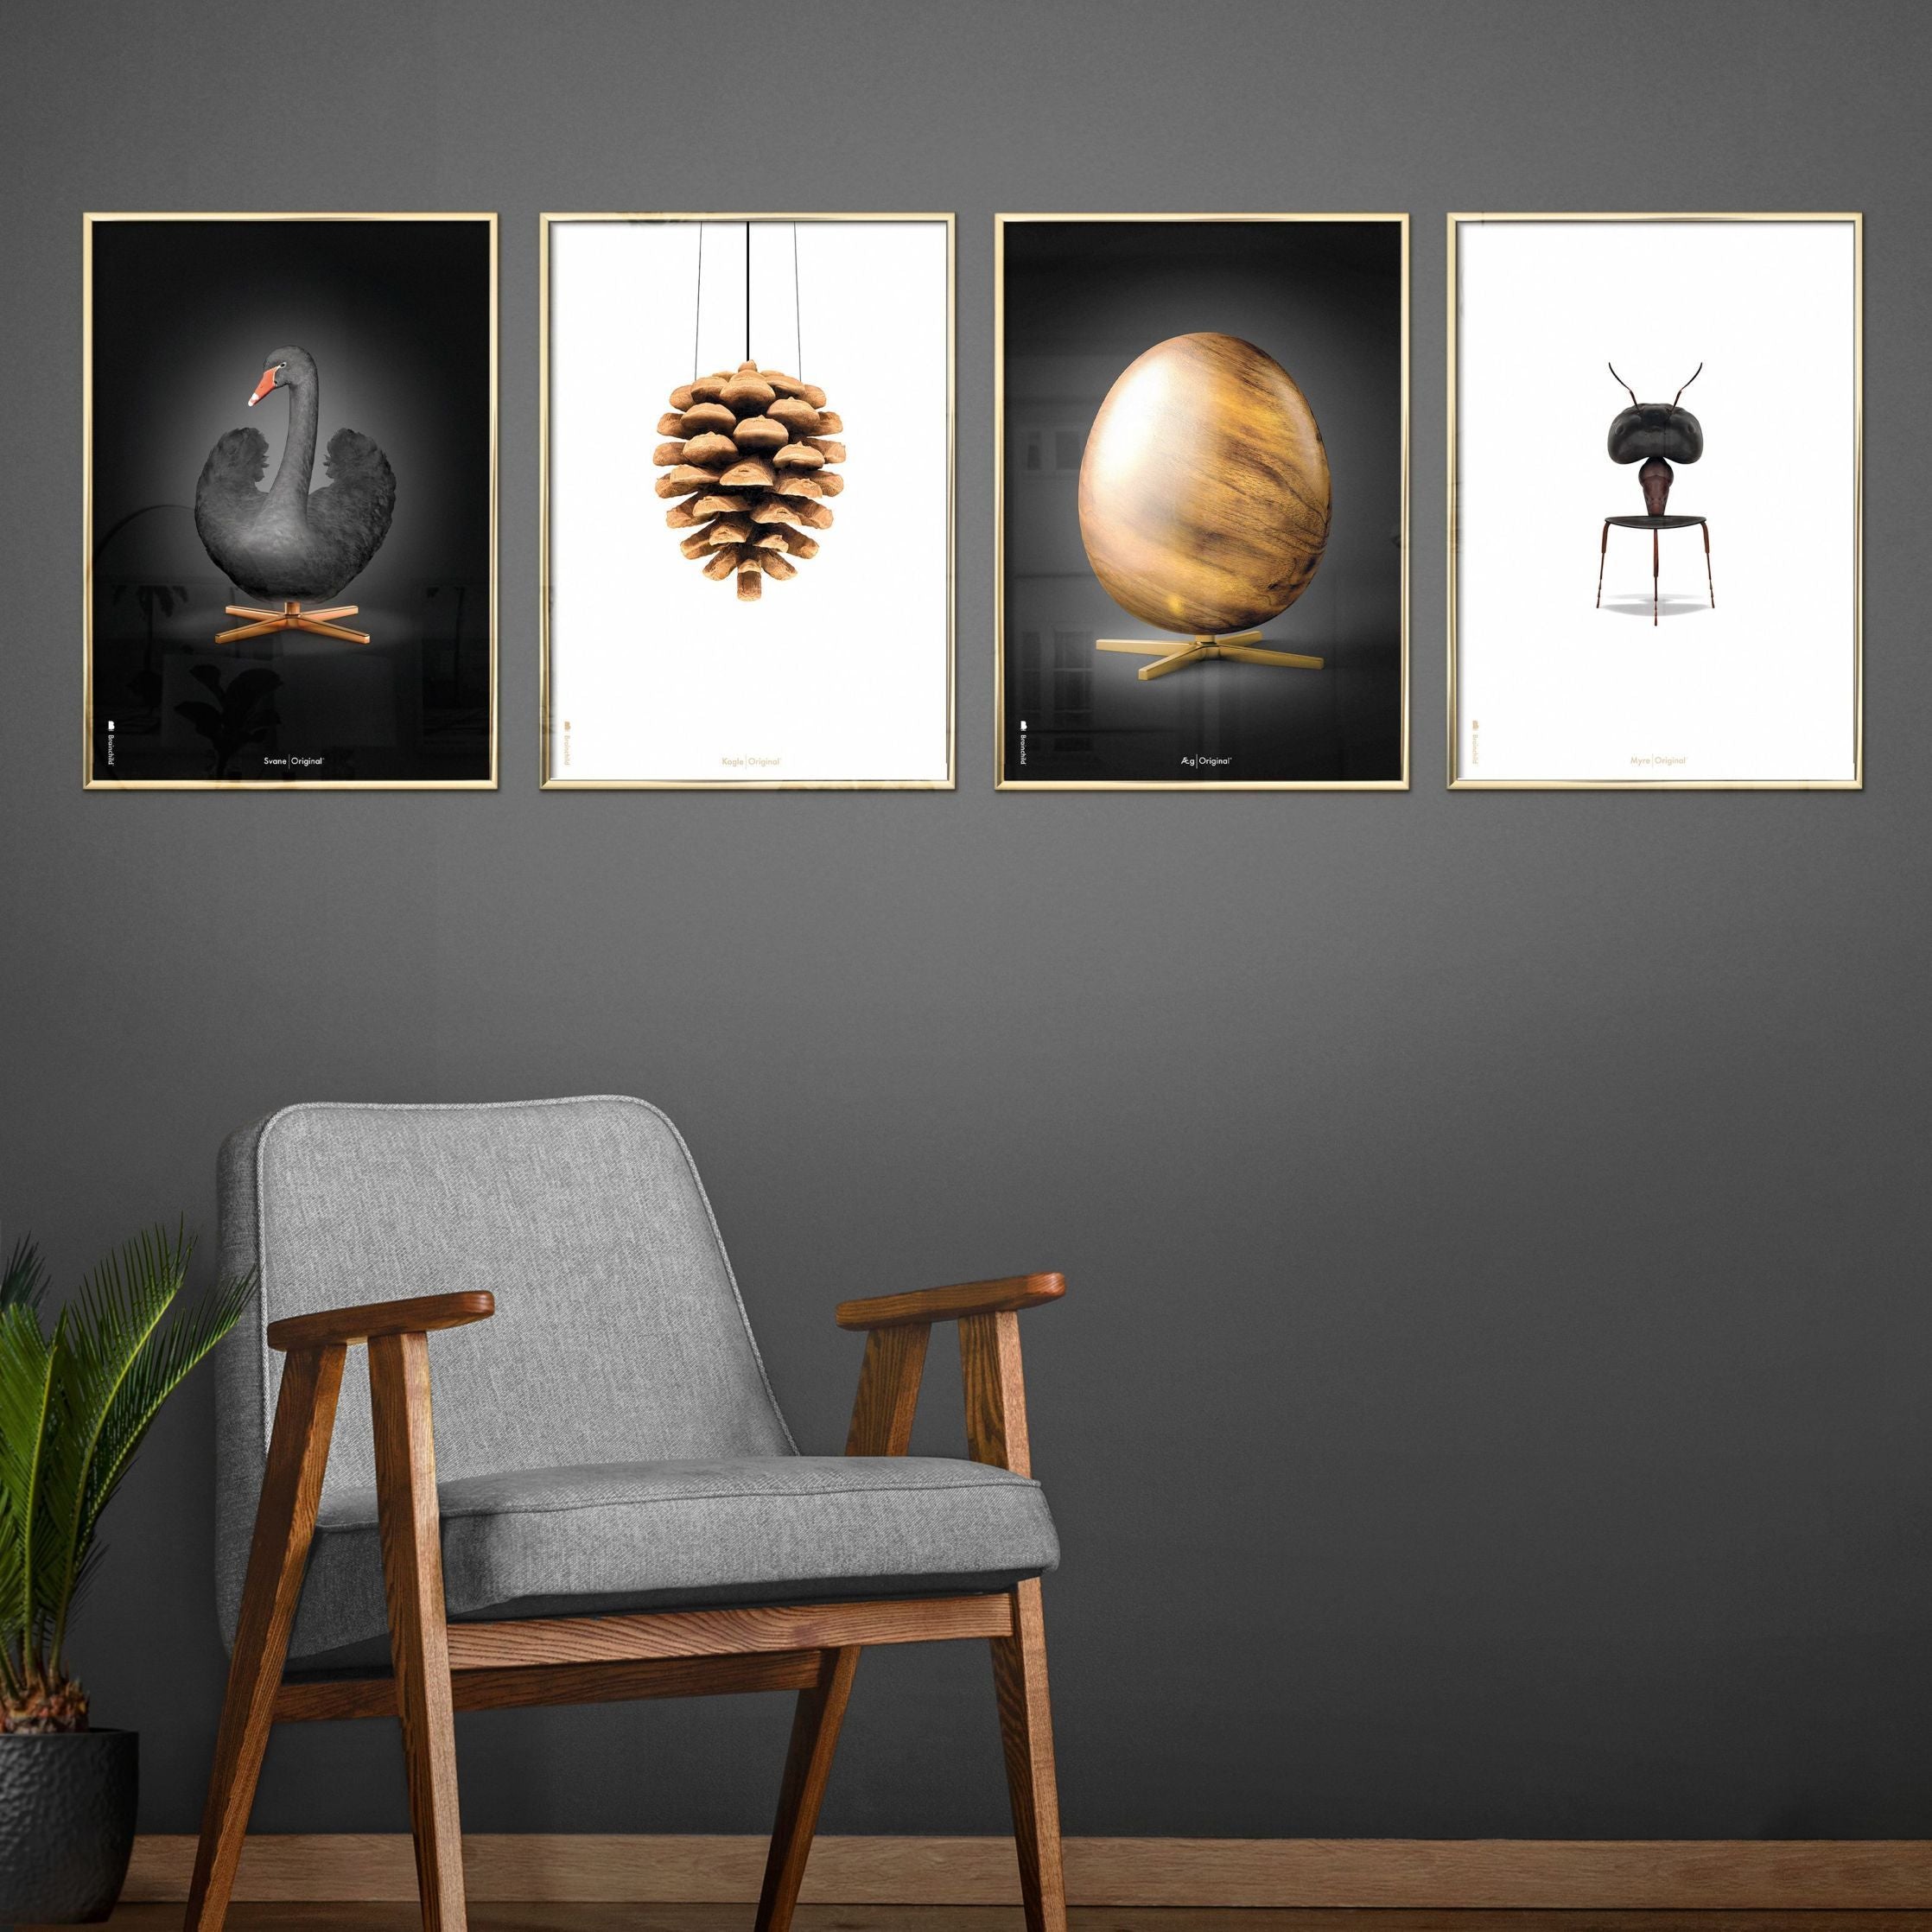 Brainchild Ant Classic Poster, Frame In Black Lacquered Wood 70x100 Cm, White Background